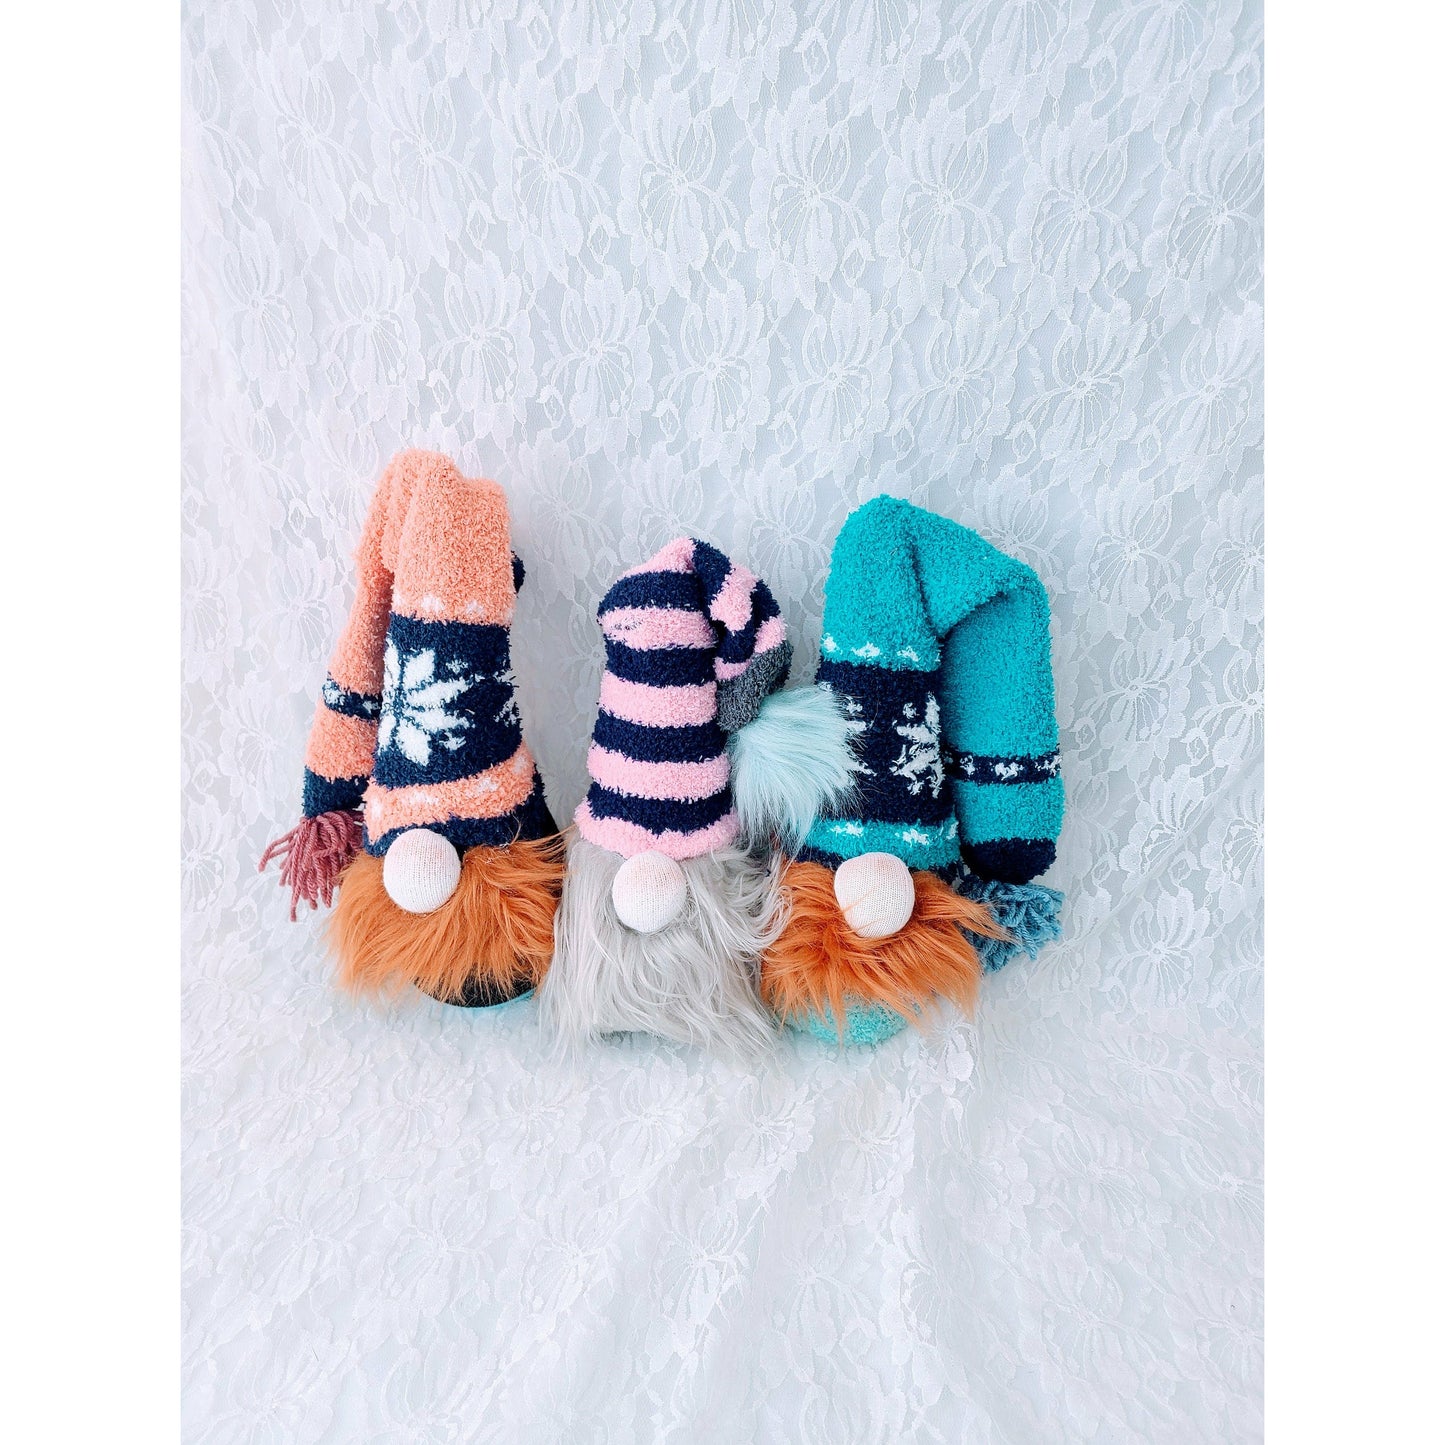 Set of Three (3) Handmade Nordic Sock Gnomes ~ Woodland Elf Gnomes ~ Christmas Decorations ~ Or Give Them As Gifts!